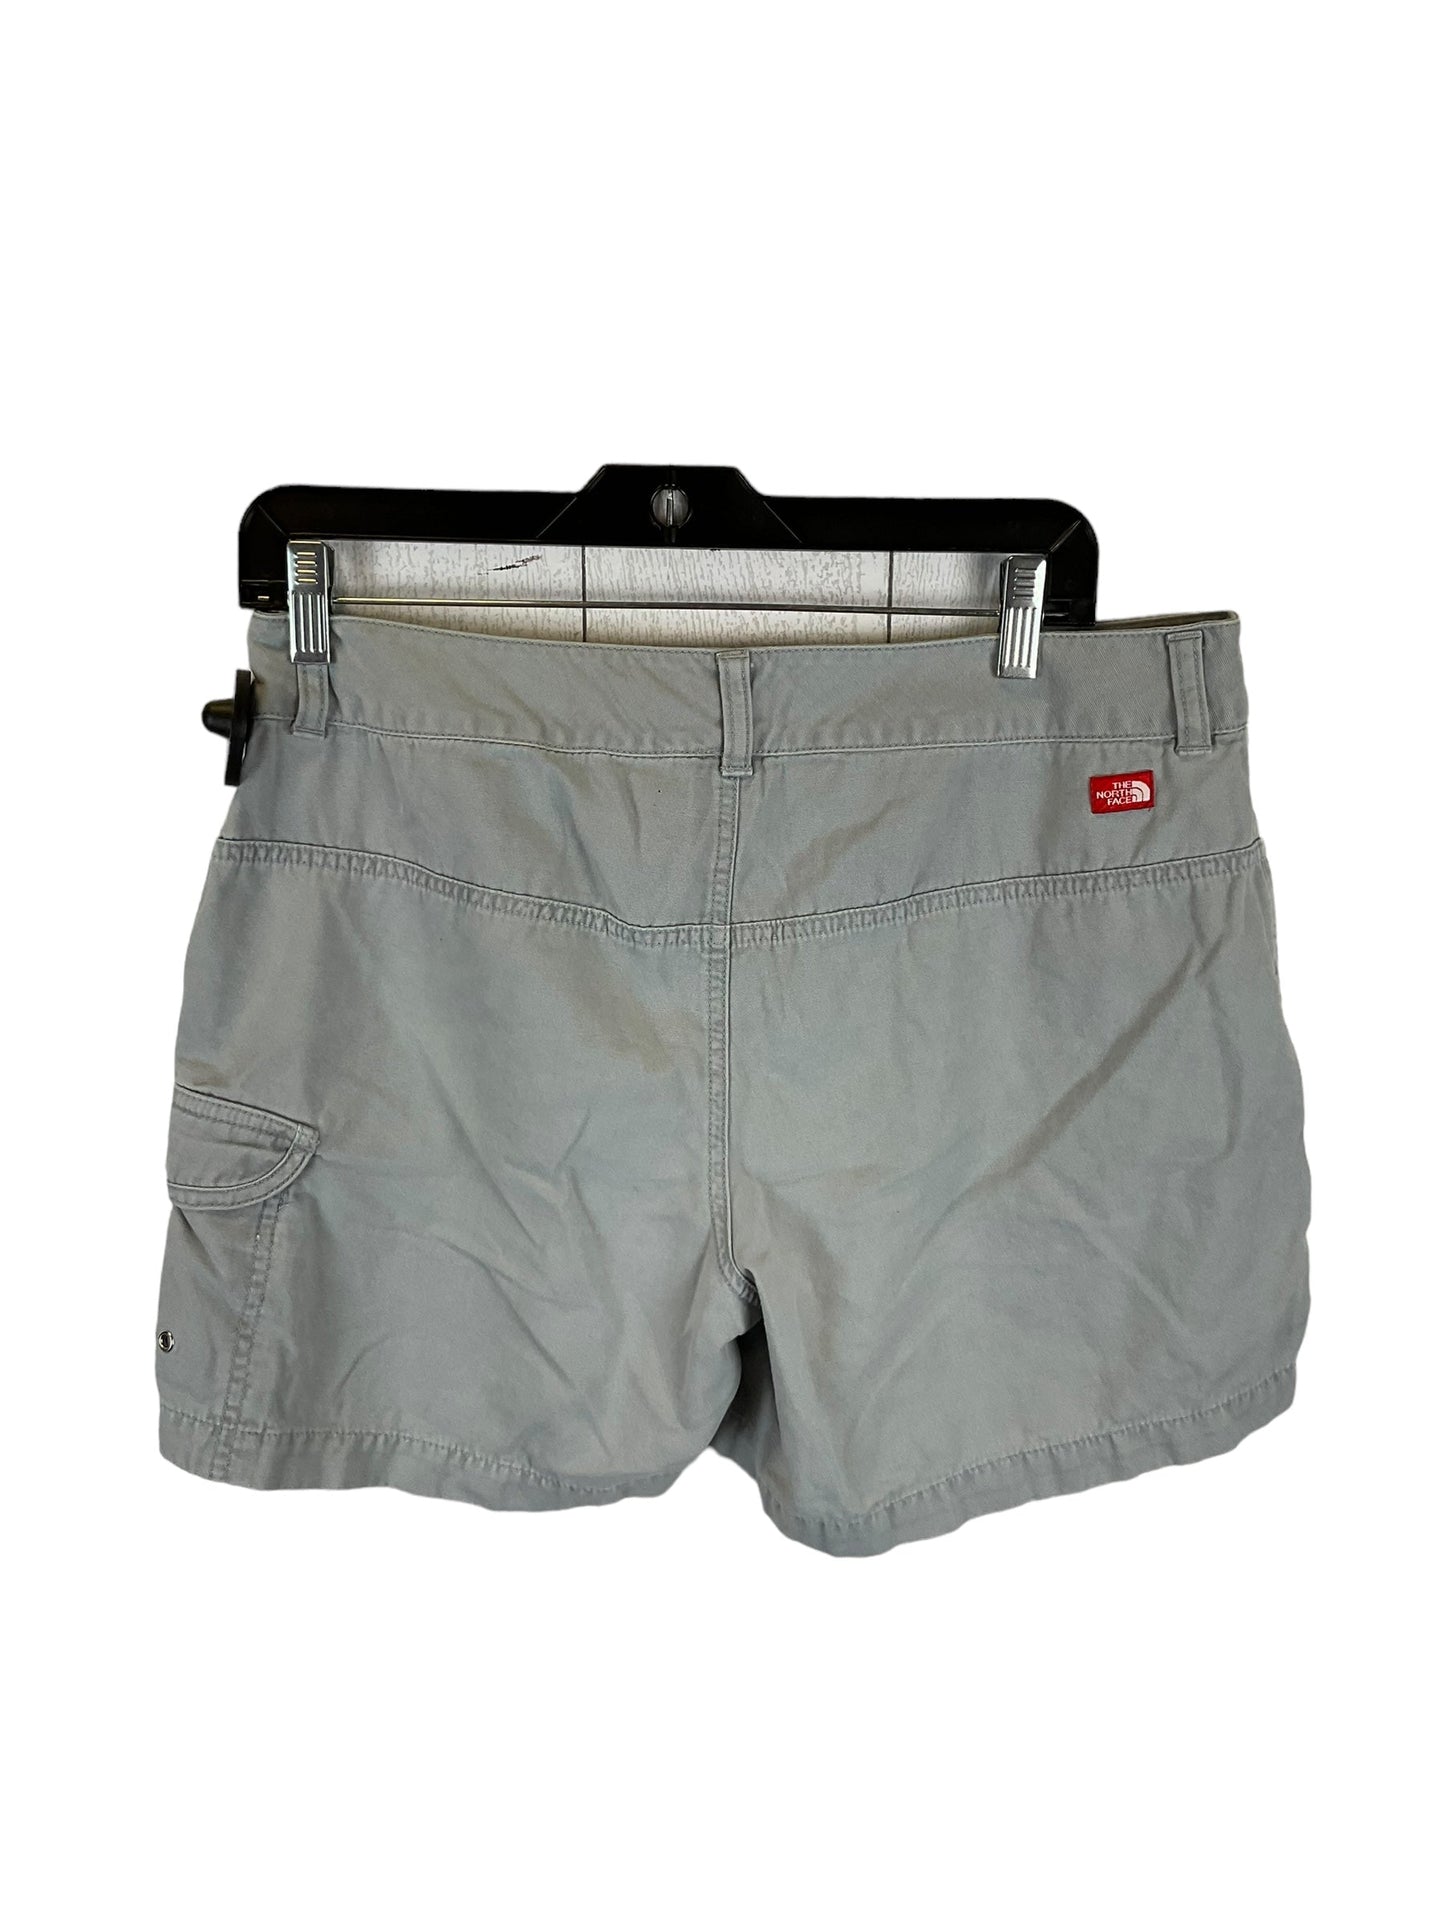 Grey Shorts The North Face, Size 12